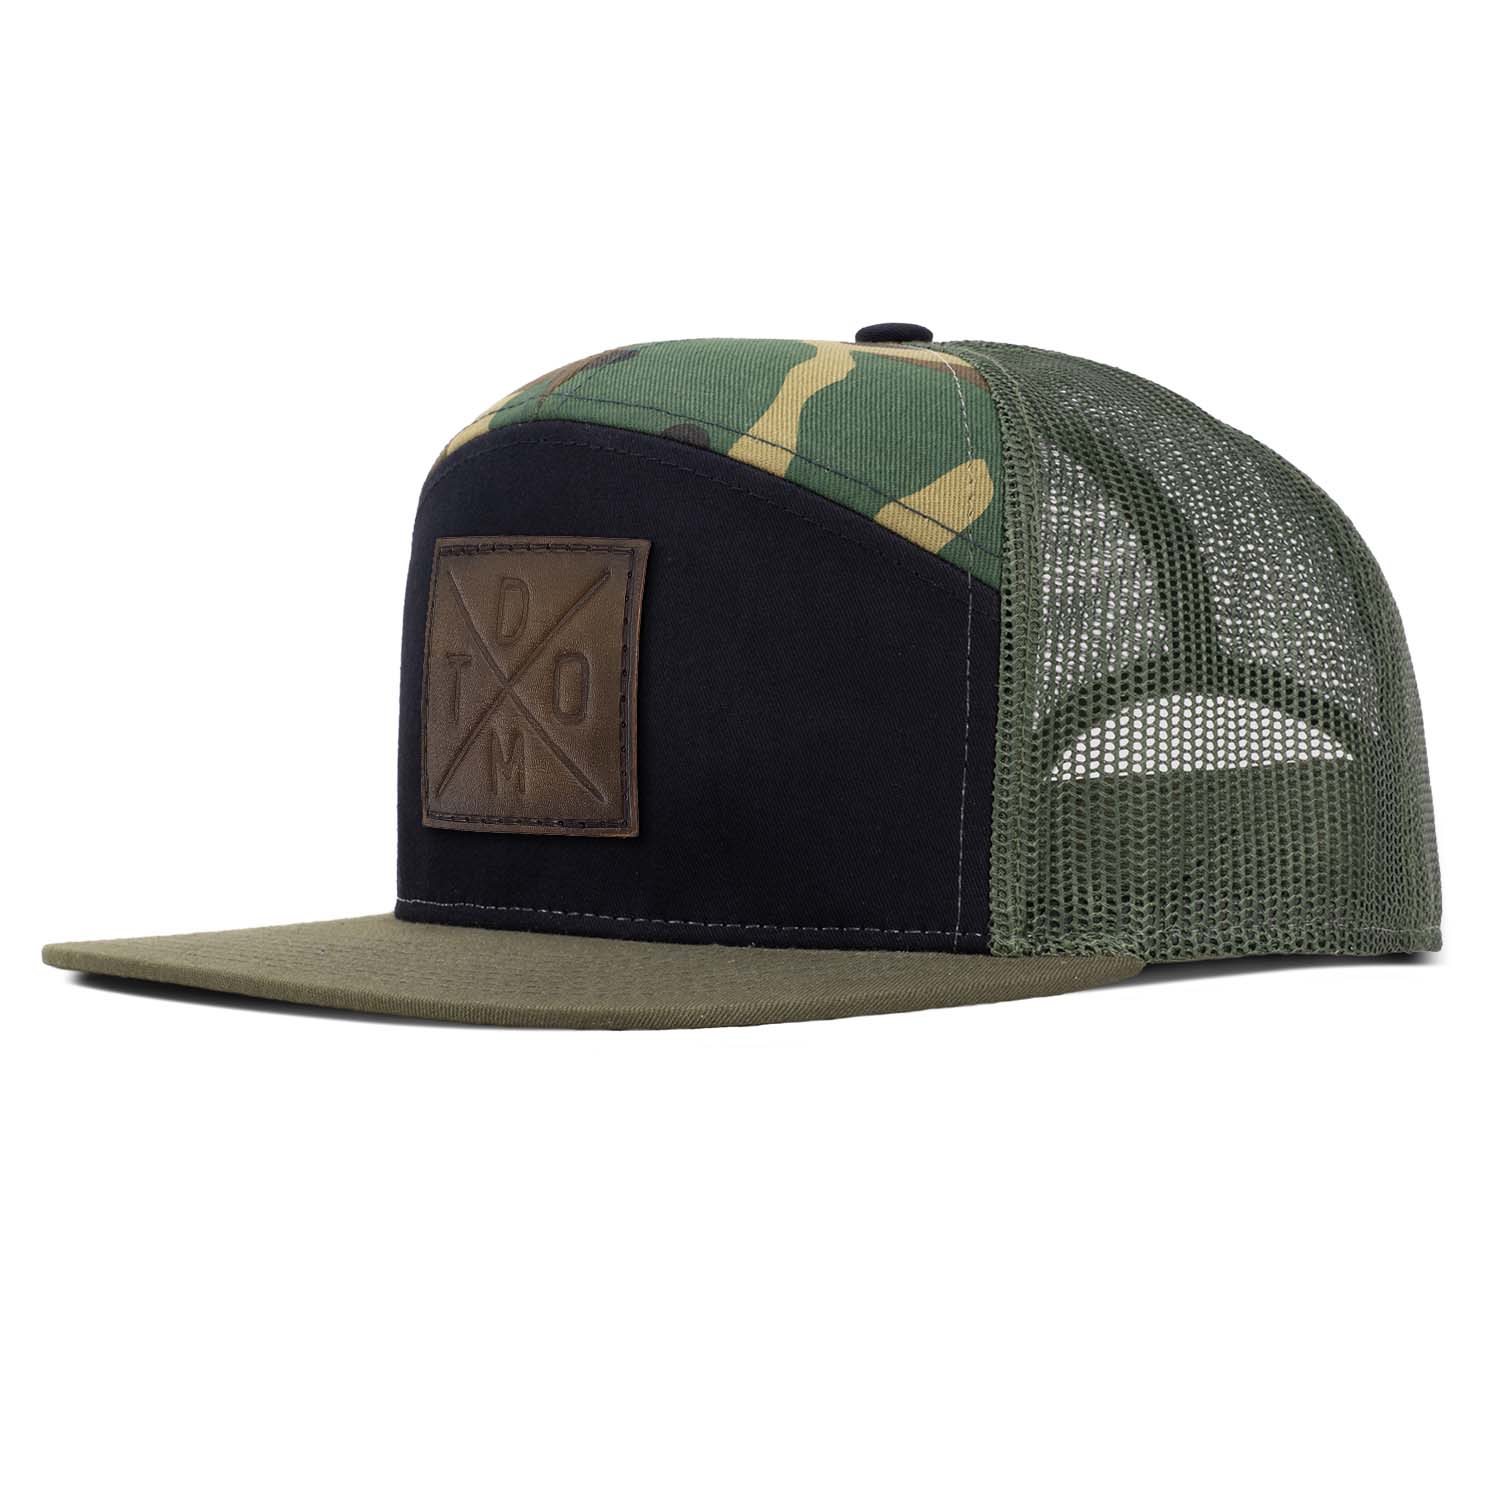 Revolution Mfg woodland camo and black with black mesh 7 panel trucker featuring our original DTOM debossed full grain leather patch.